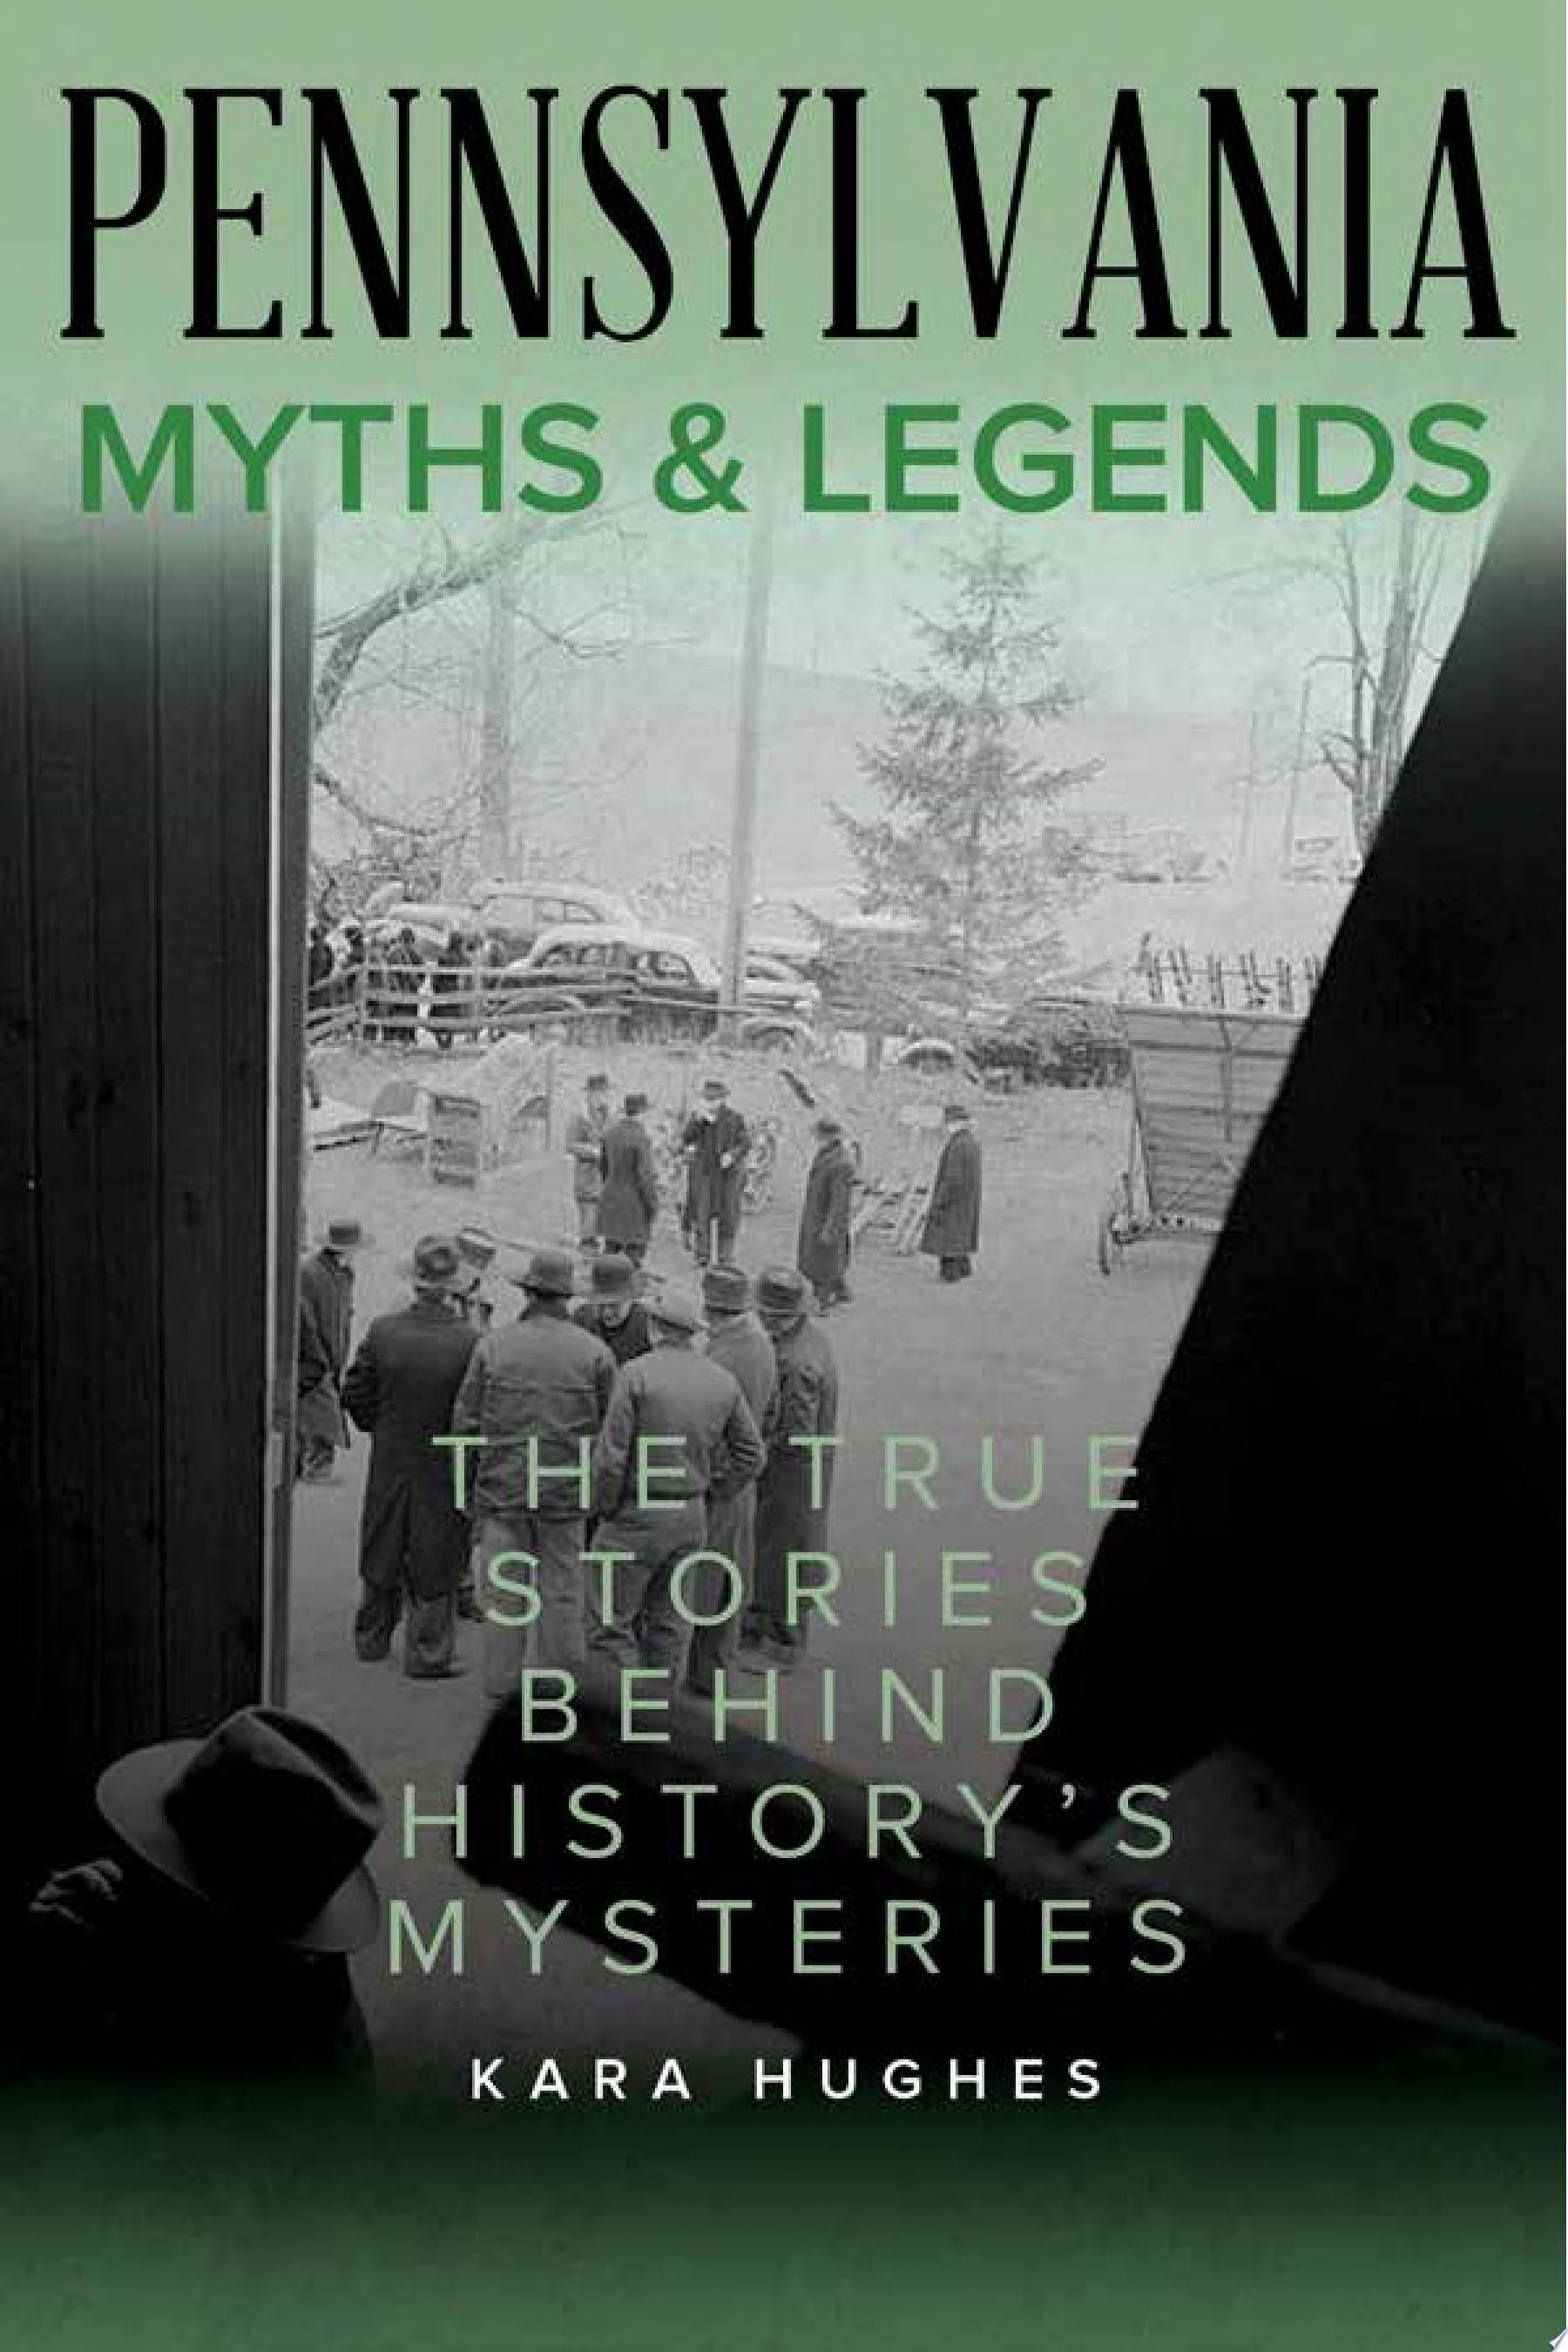 Image for "Pennsylvania Myths and Legends"